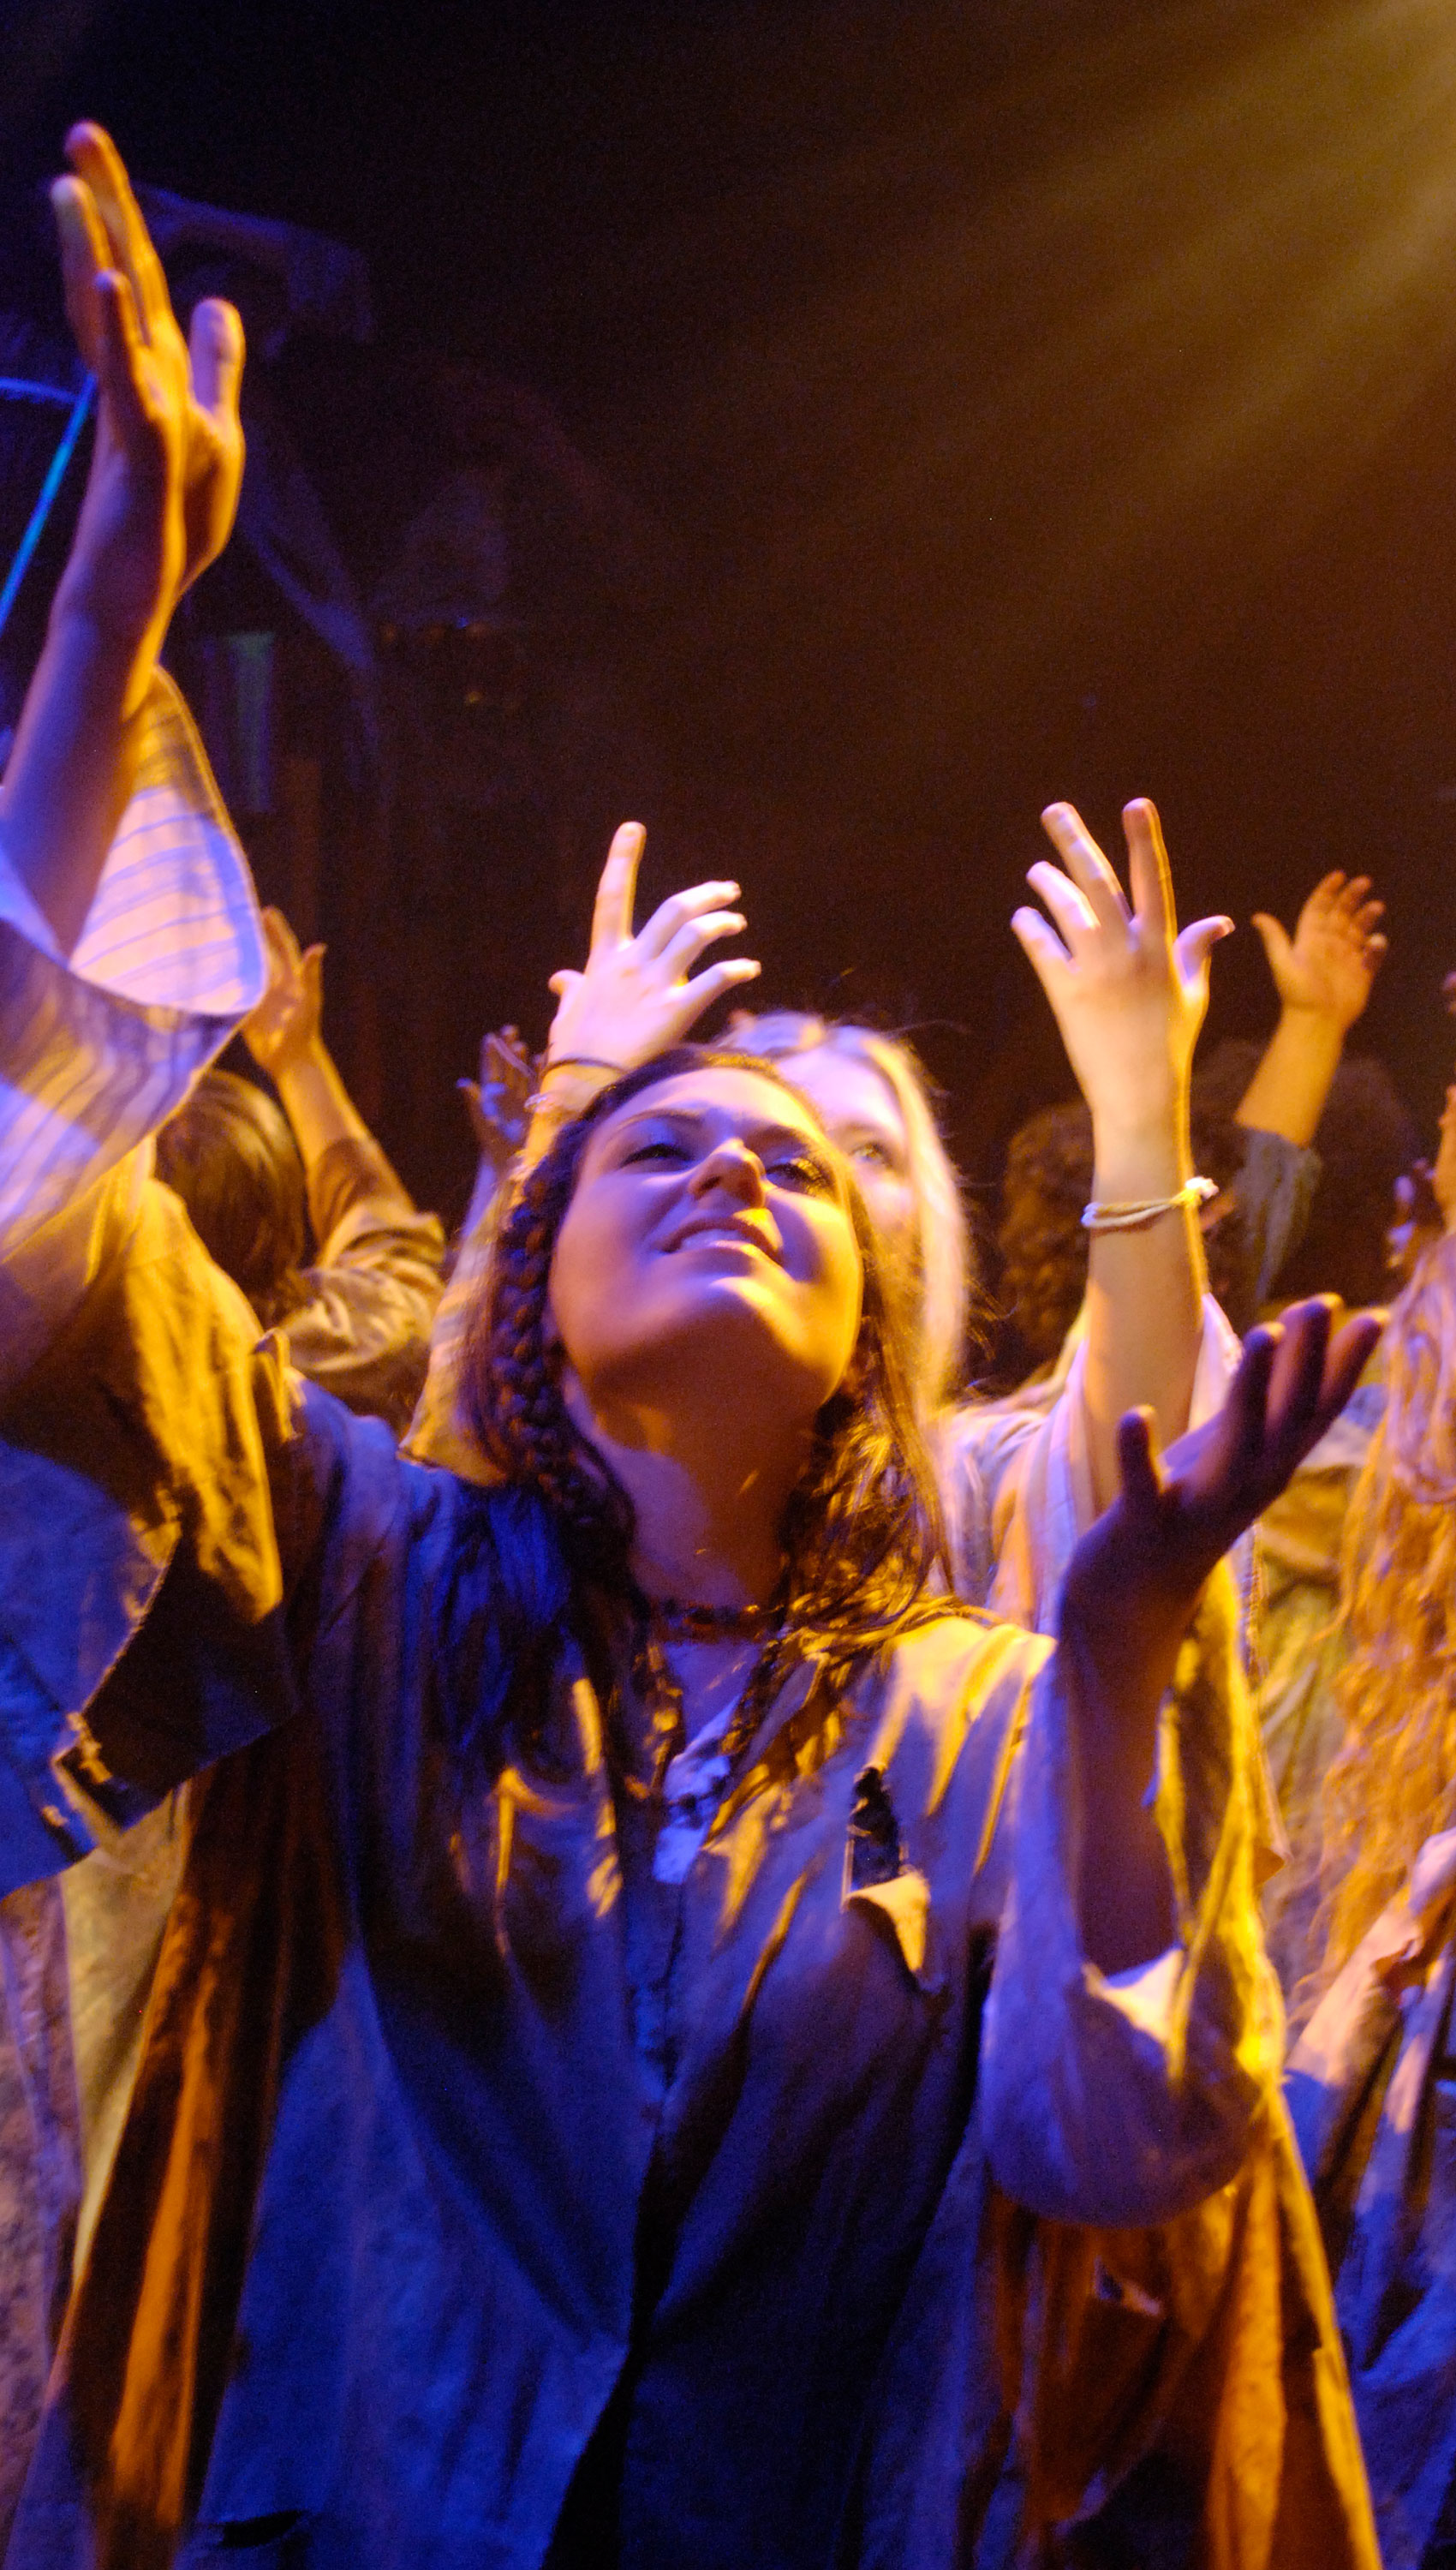 Characters are grouped together on stage raising their hands reverently. A woman looks up with reverence on her face. 